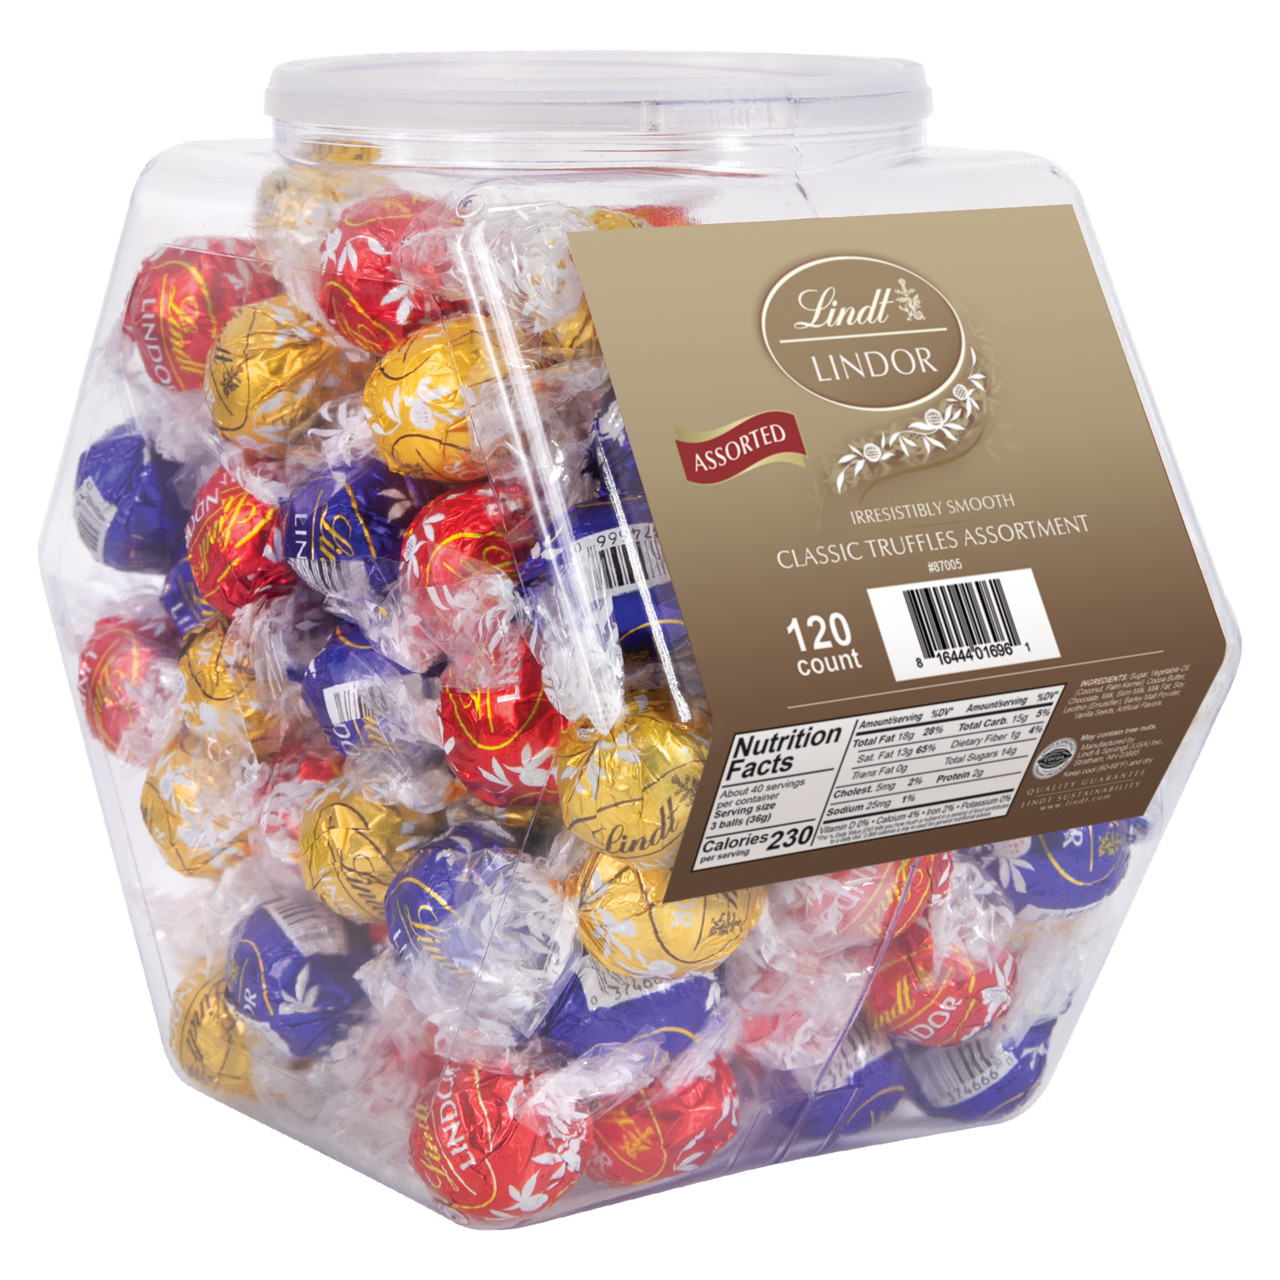 Buy our lindt truffles chocolate gift box - 40 count at